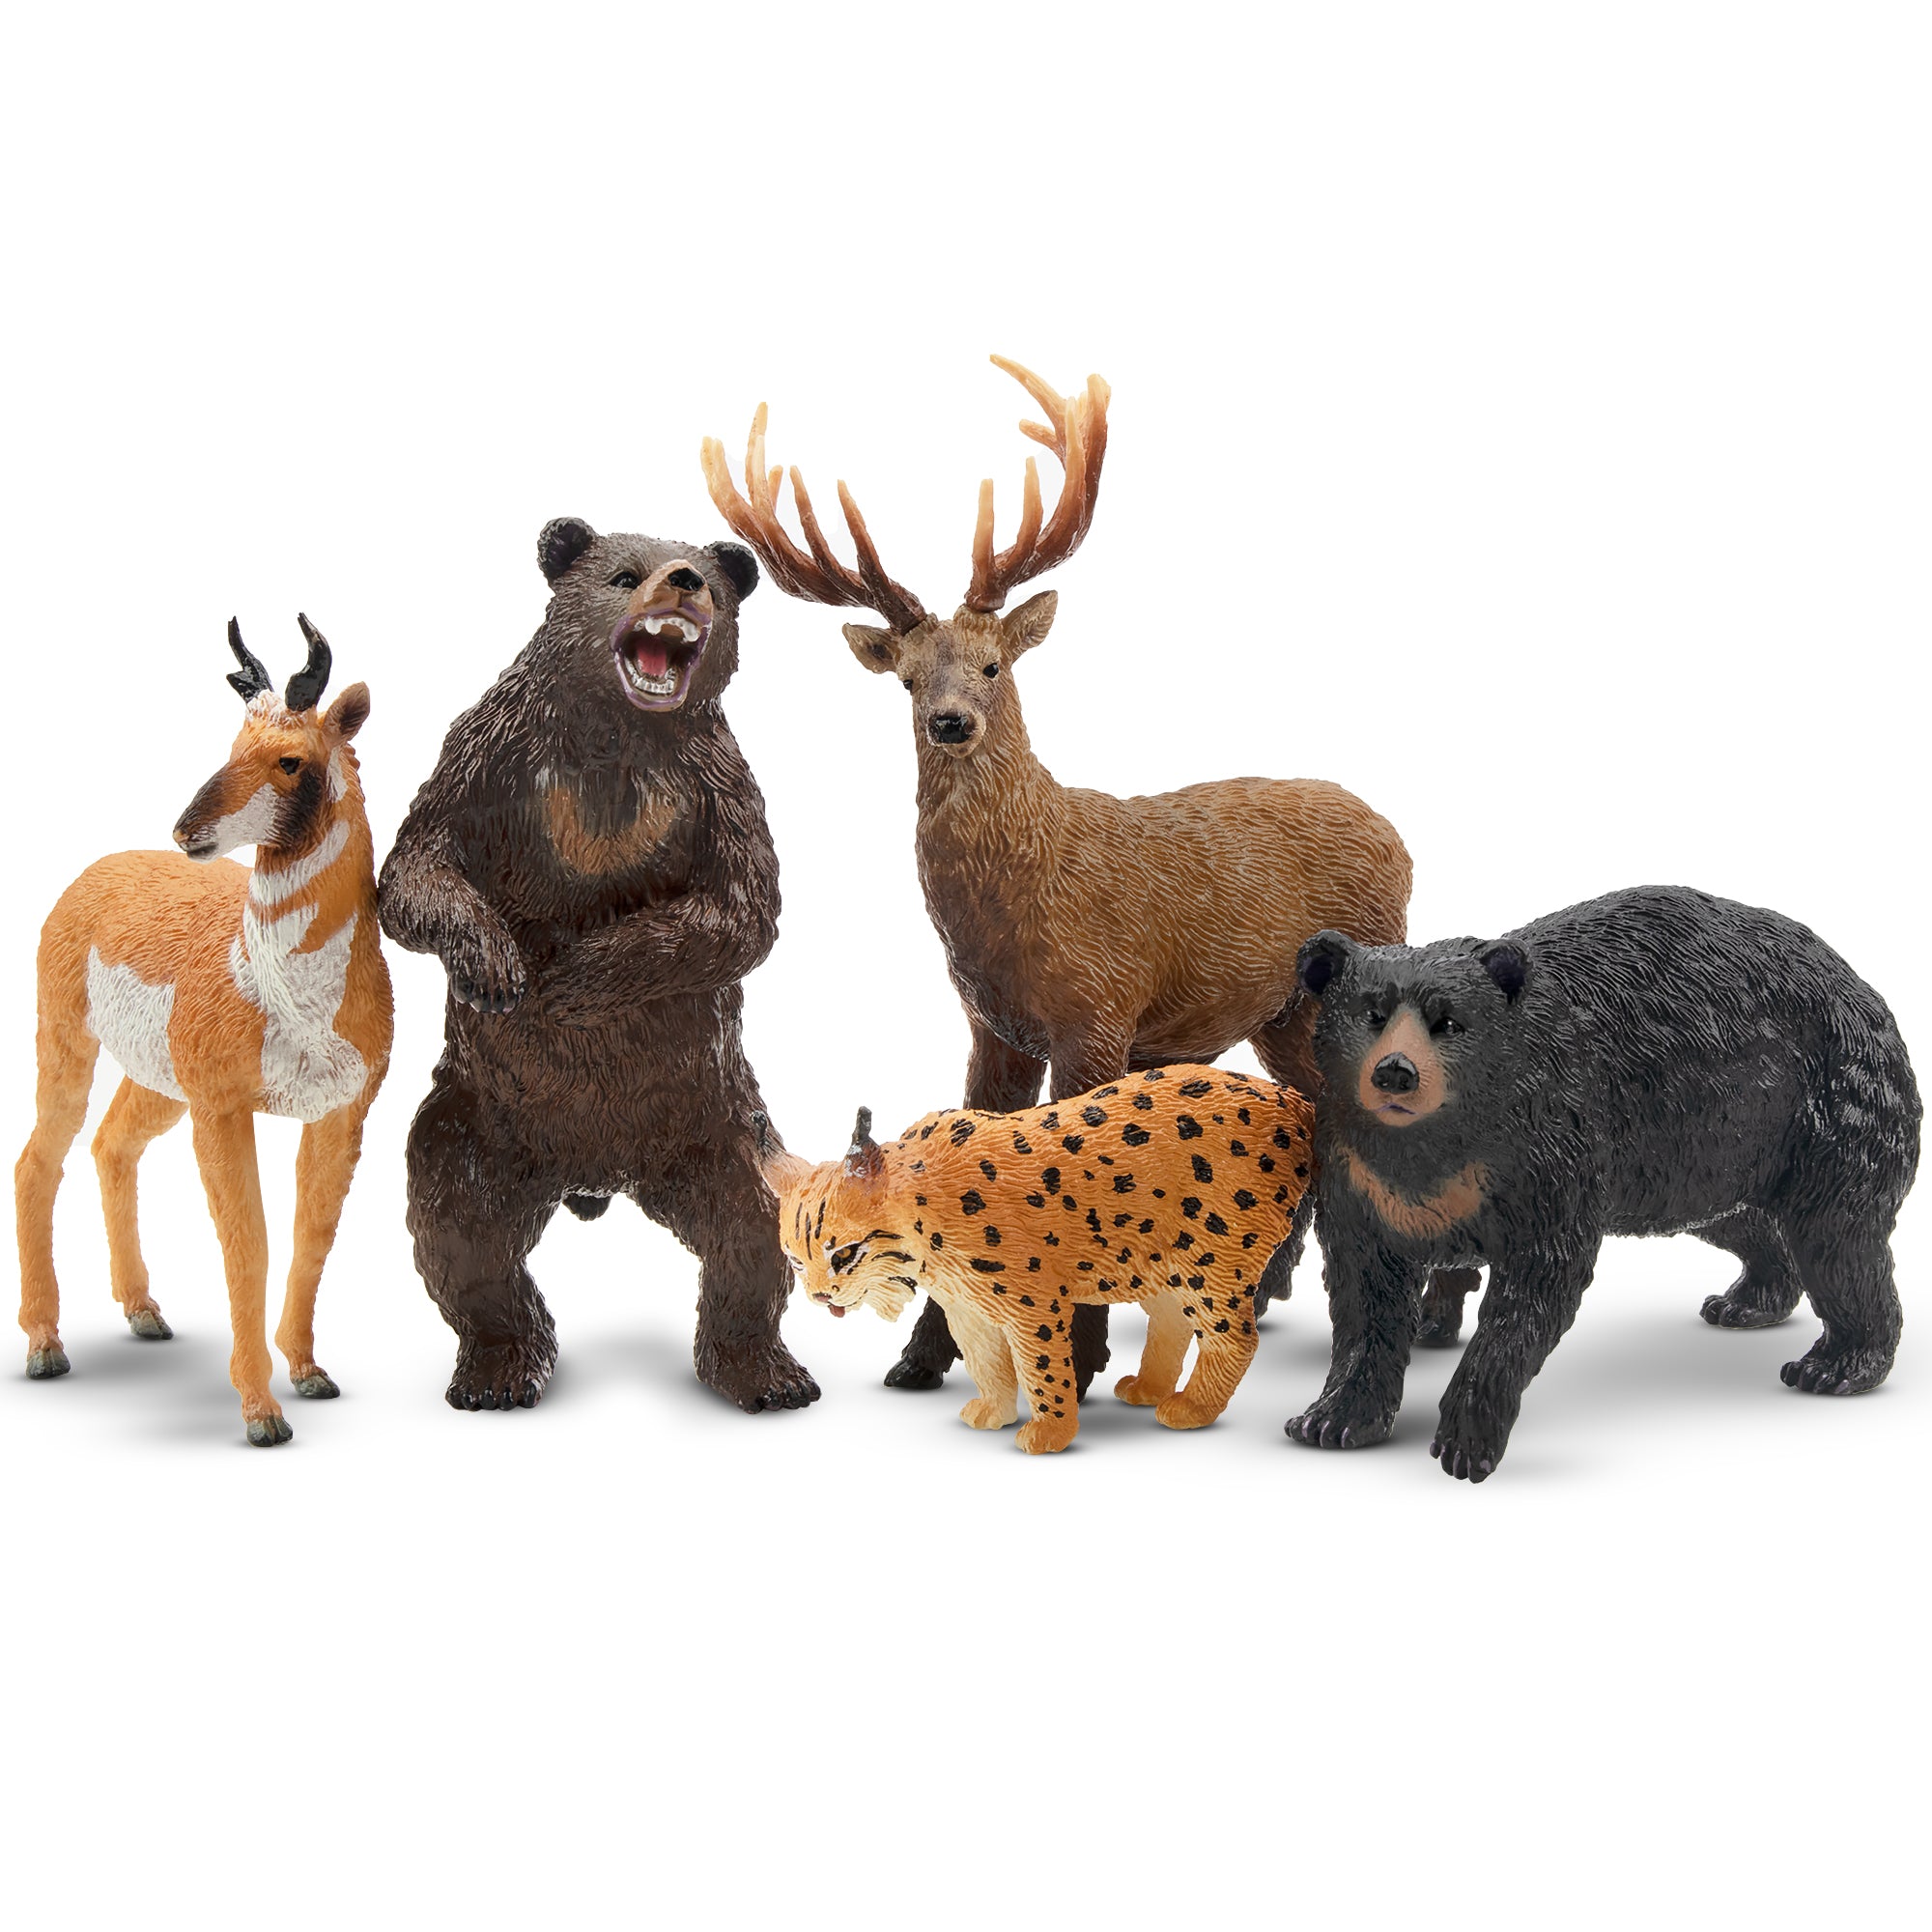 12-Piece North American Forest Animal Figurines Playset-2